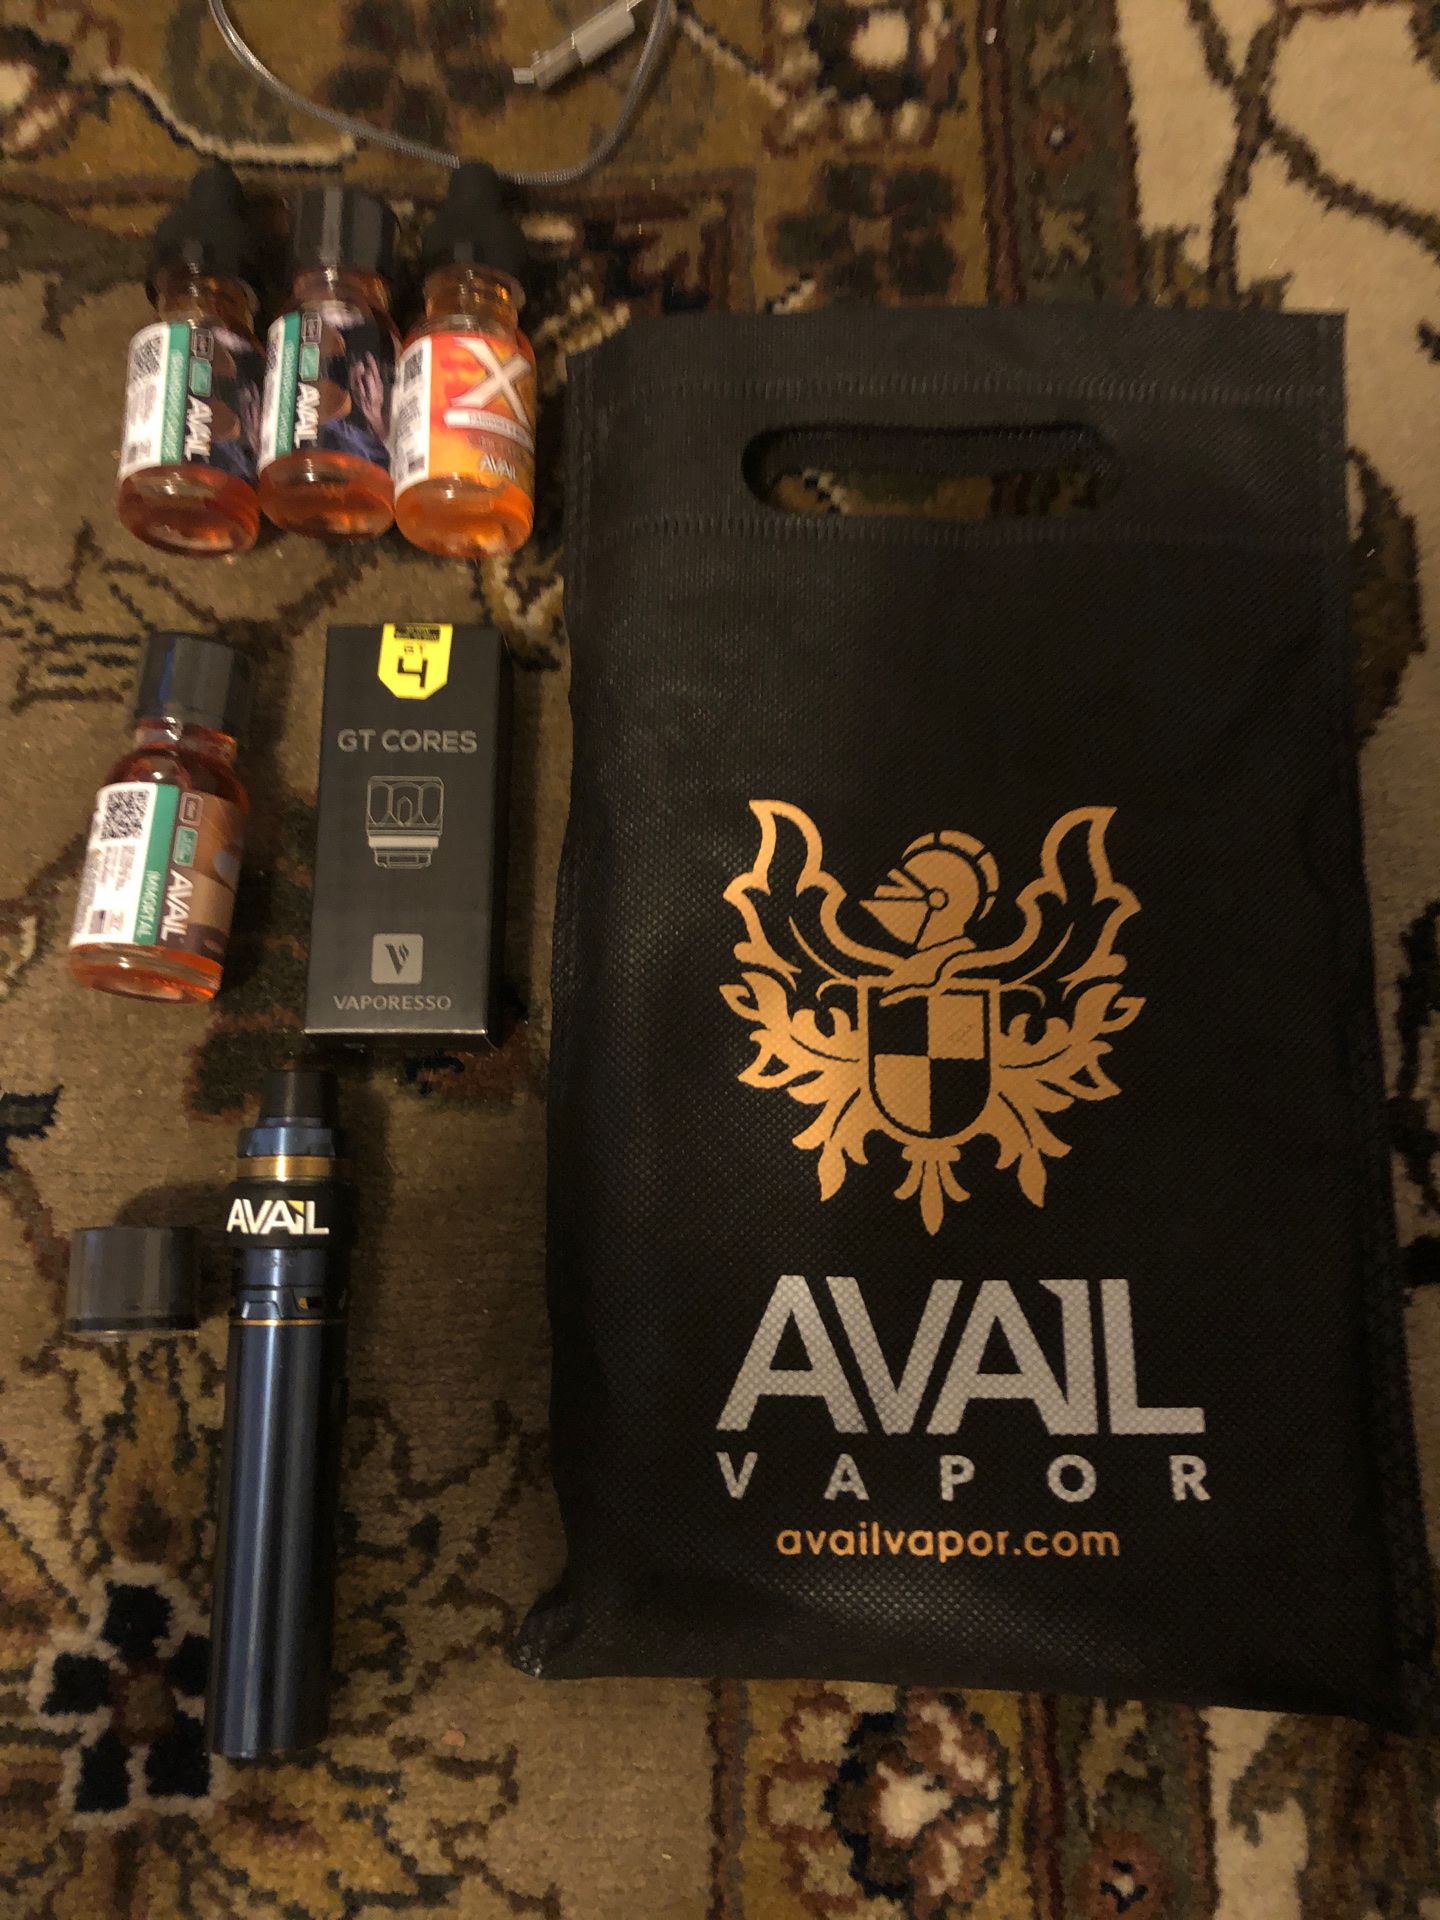 Avail vapor kit with 4ea flavors